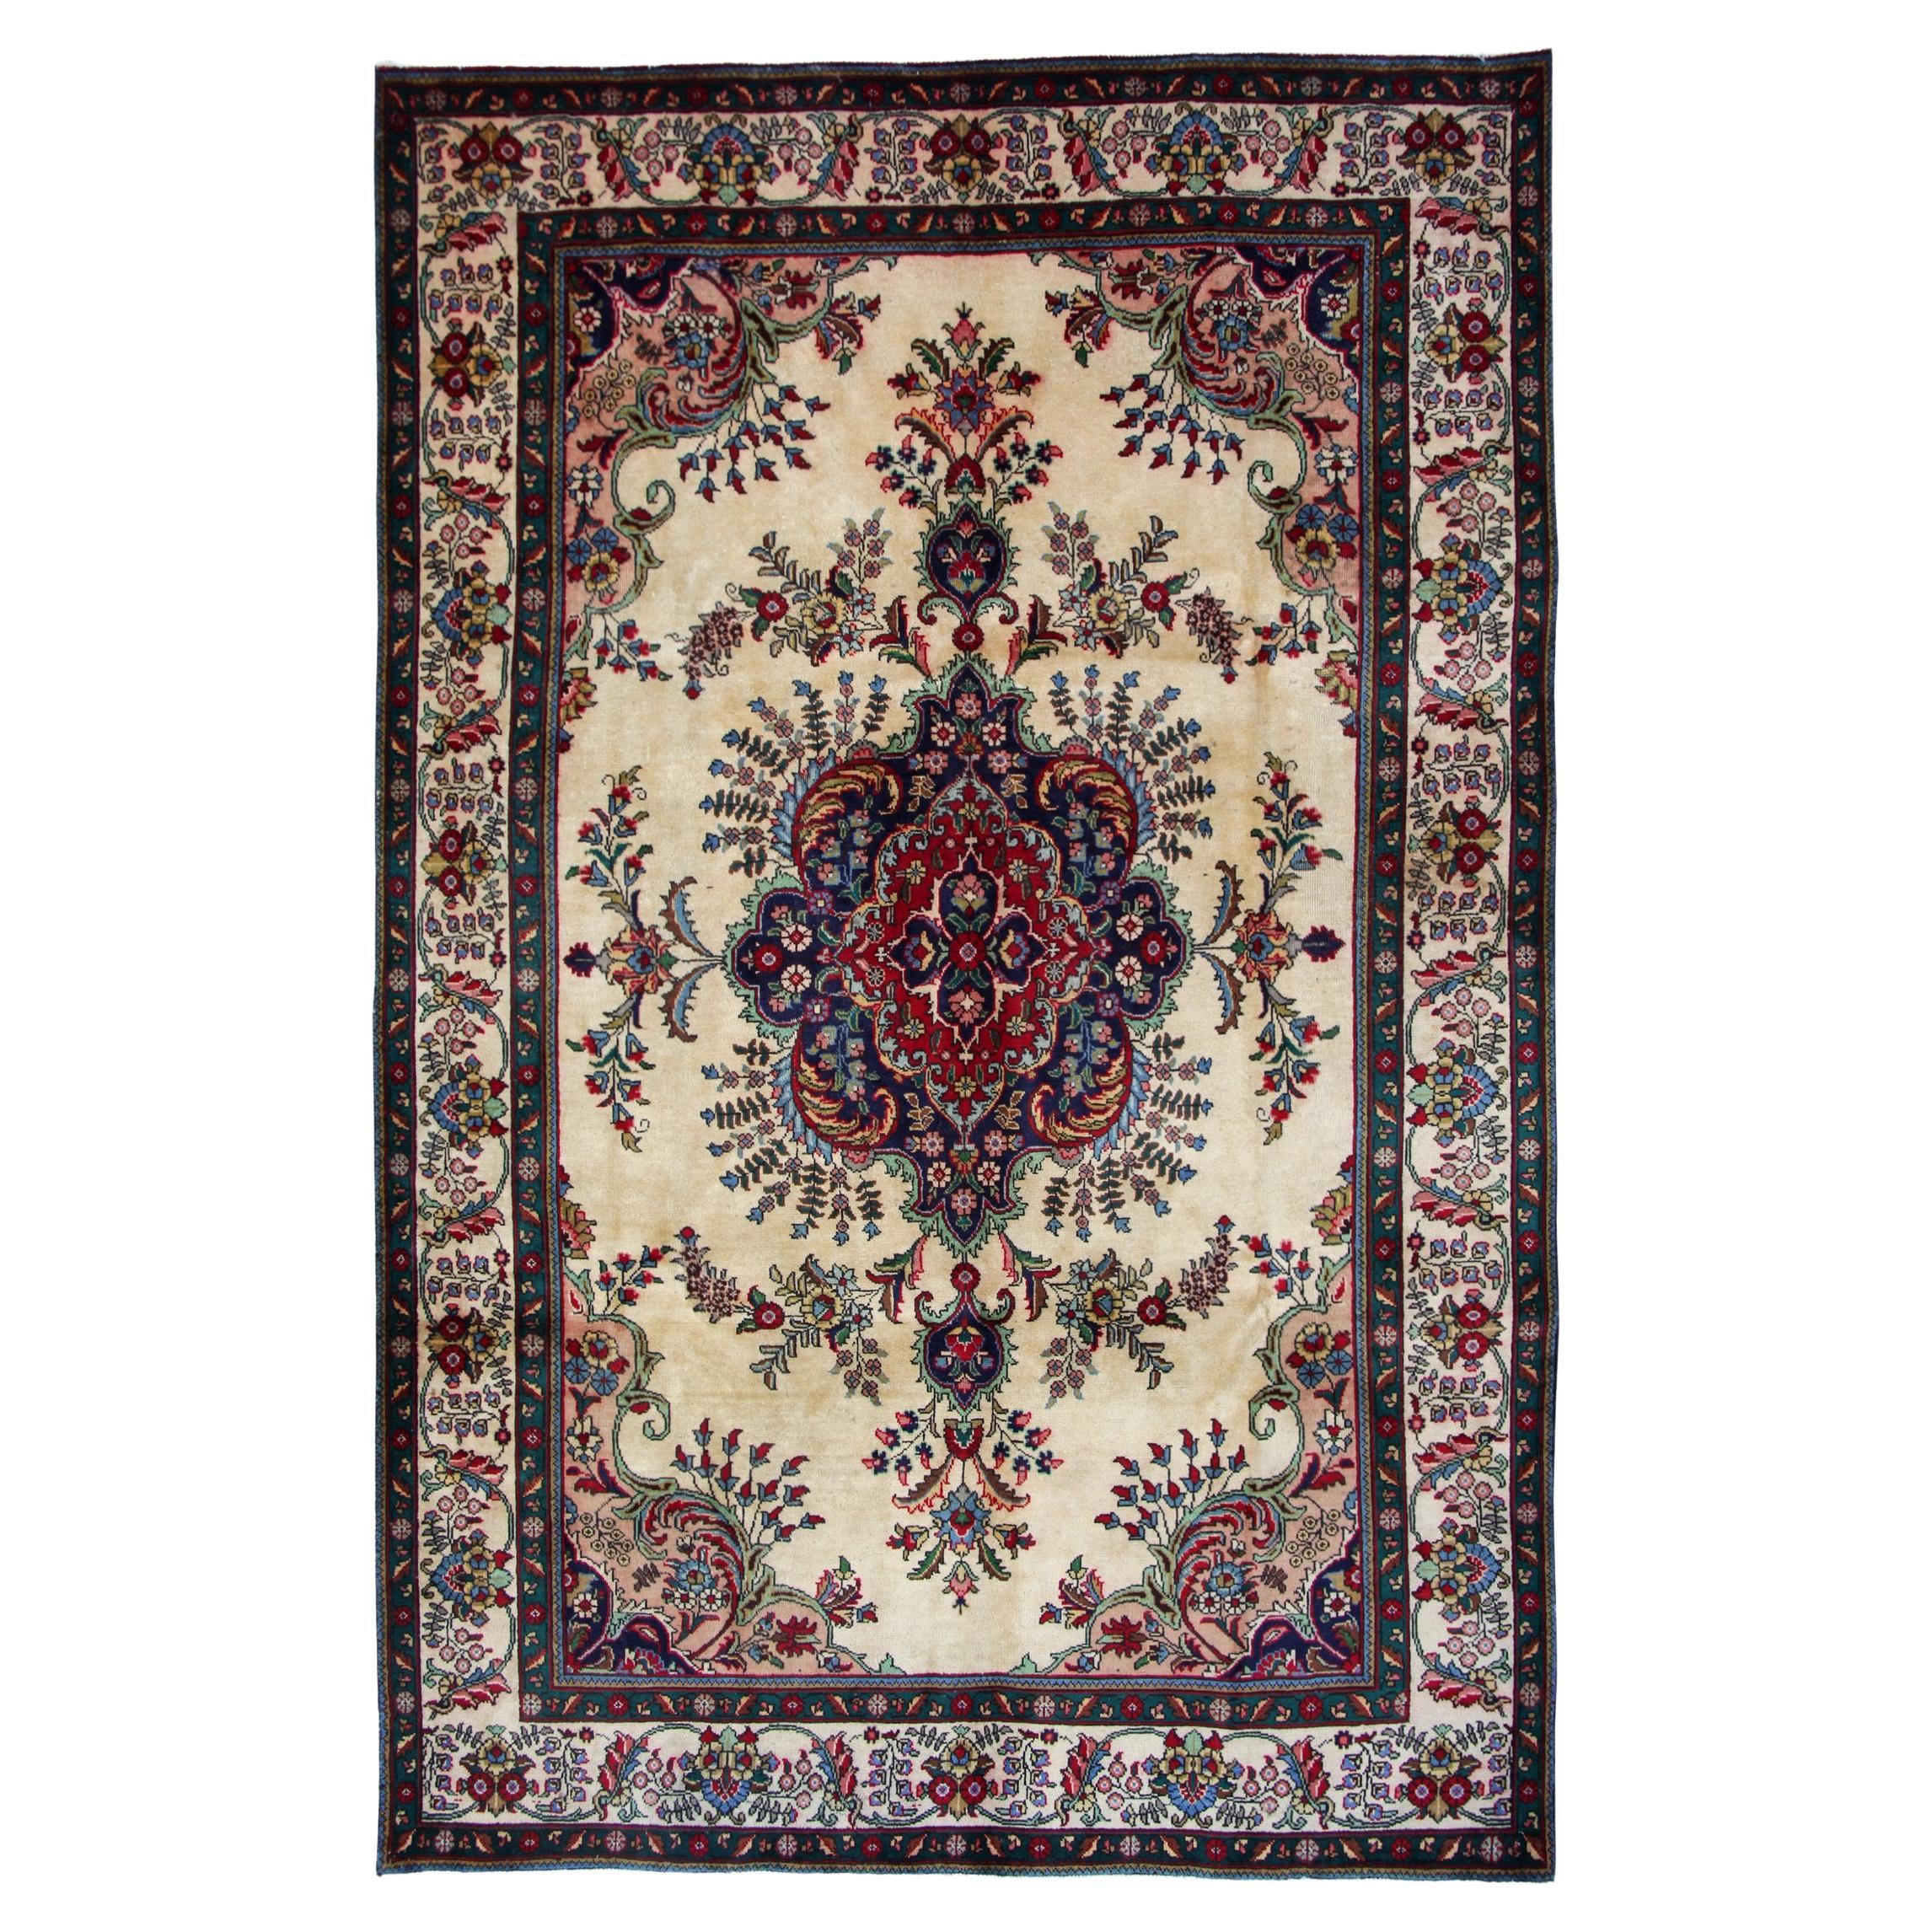 Large Cream Carpet Wool Area Rug, Traditional Floral Living Room Rug For Sale